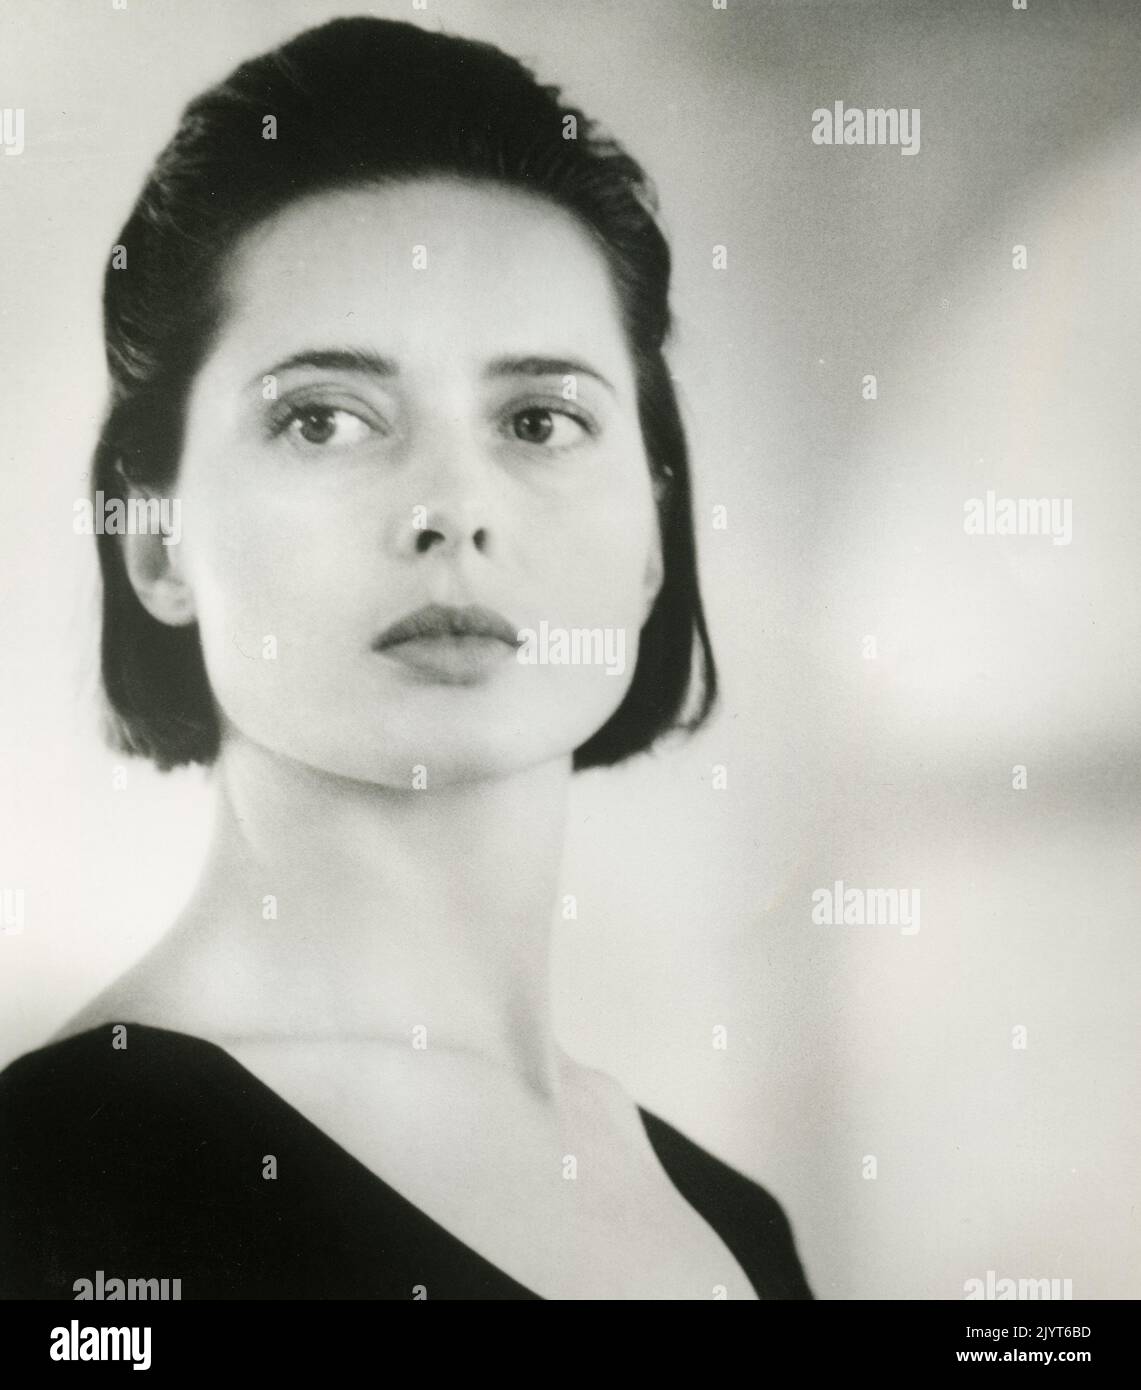 L'actrice italienne Isabella Rossellini dans le film Fearless, USA 1993 Banque D'Images